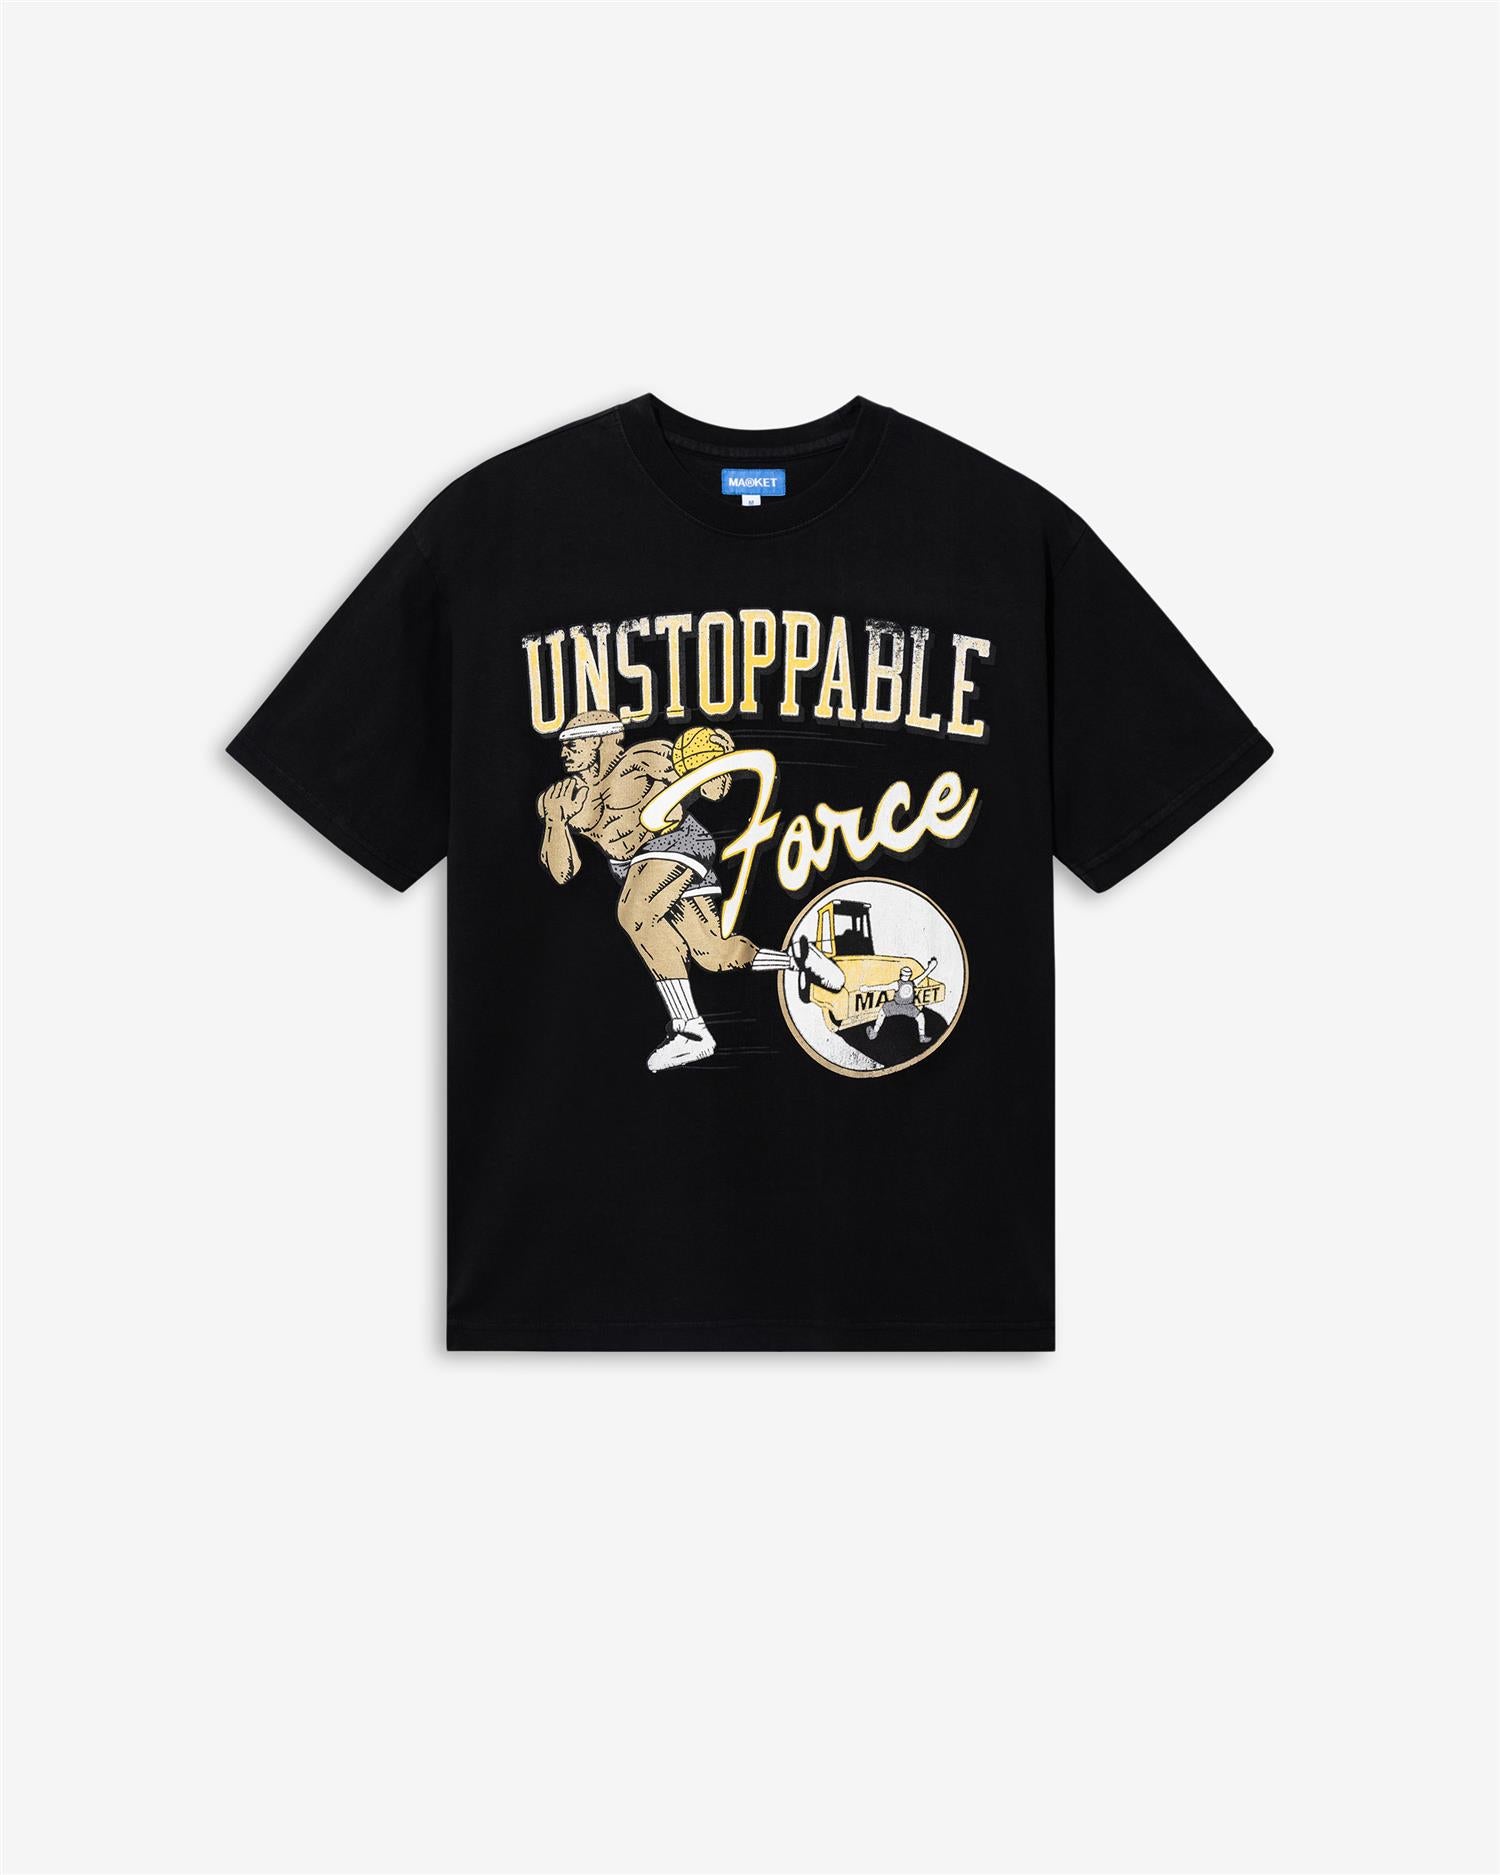 UNSTOPPABLE FORCE T-SHIRT - BLACK